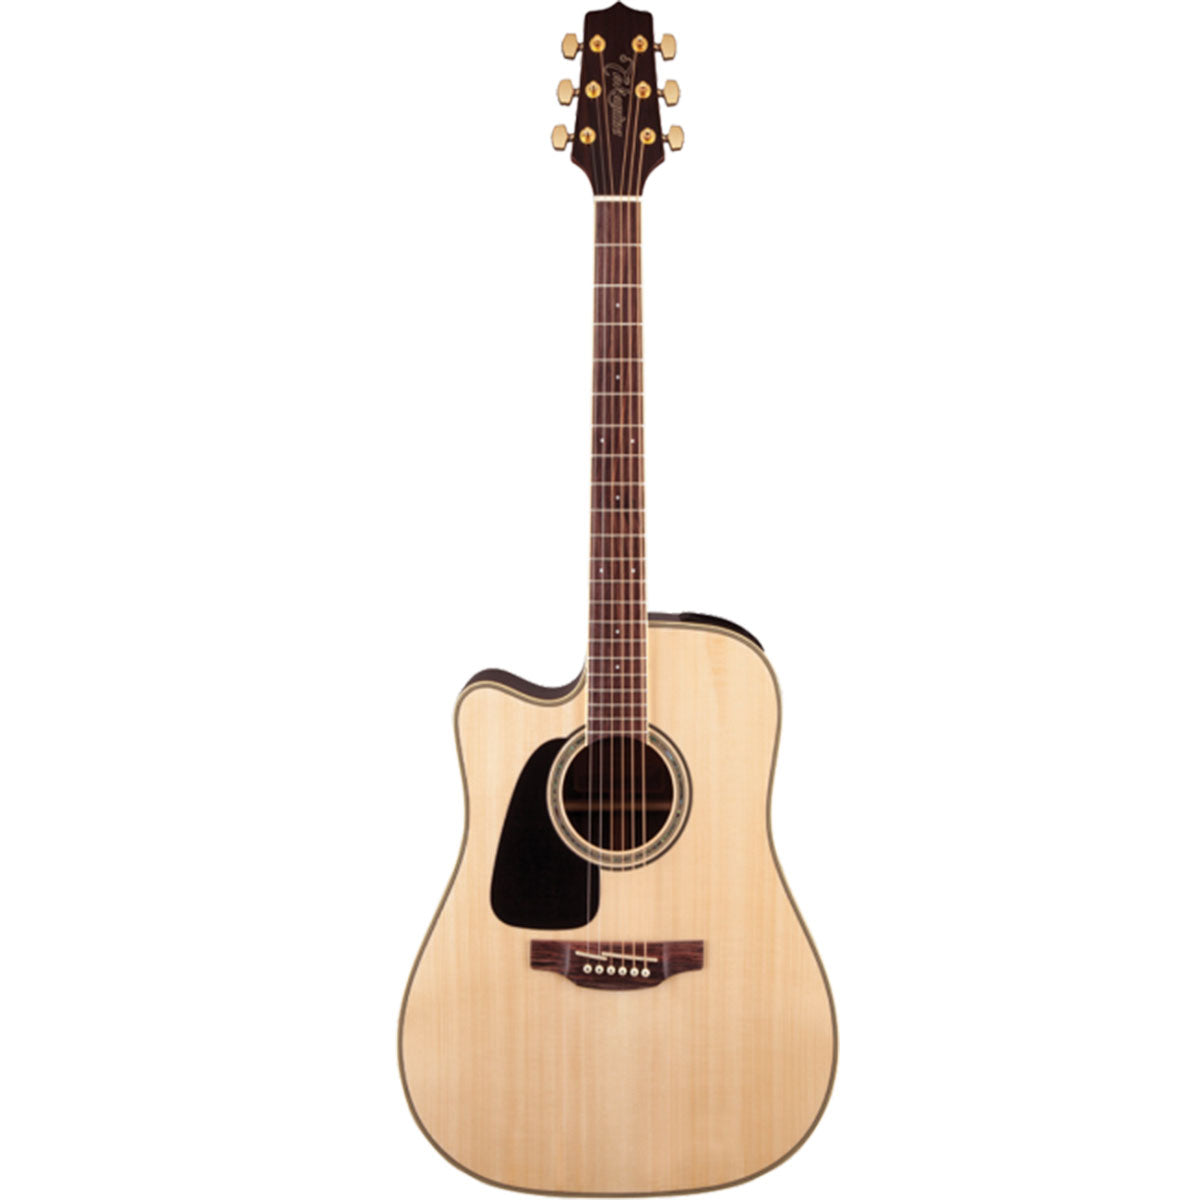 Takamine G50 Series Acoustic Guitar Left Handed Dreadnought Natural w/ Pickup & Cutaway - TGD51CENATLH